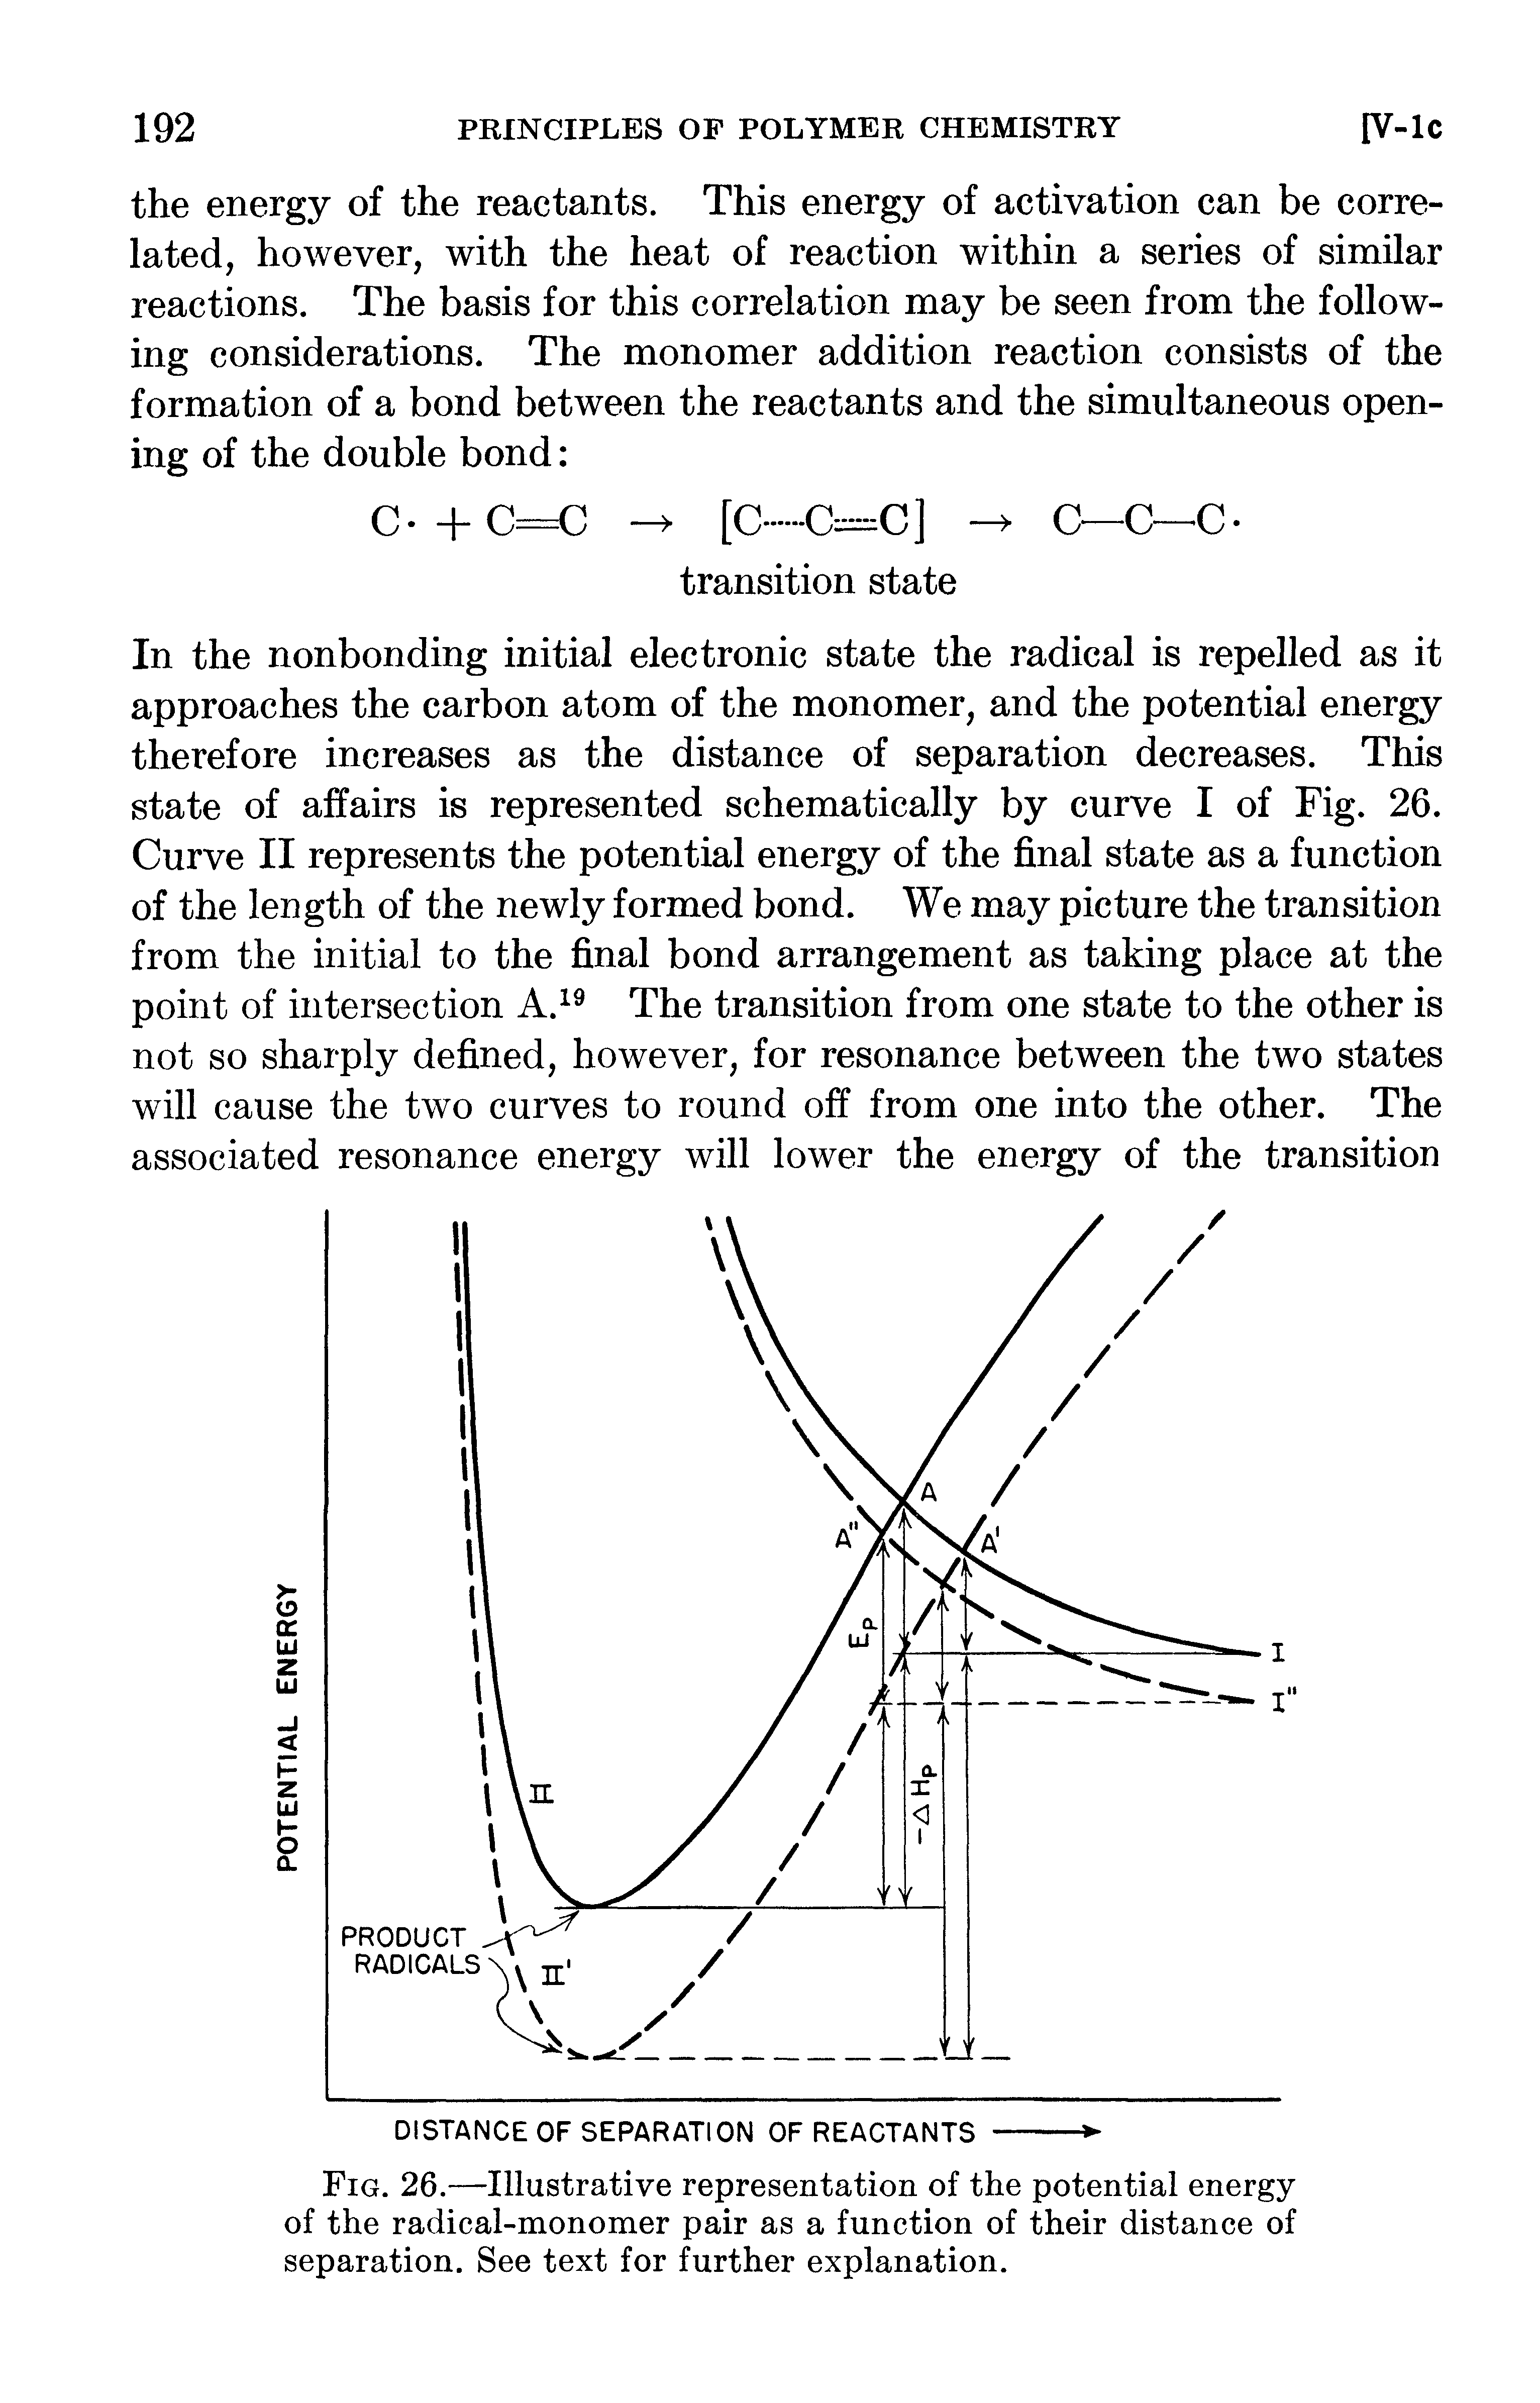 Fig. 26.—Illustrative representation of the potential energy of the radical-monomer pair as a function of their distance of separation. See text for further explanation.